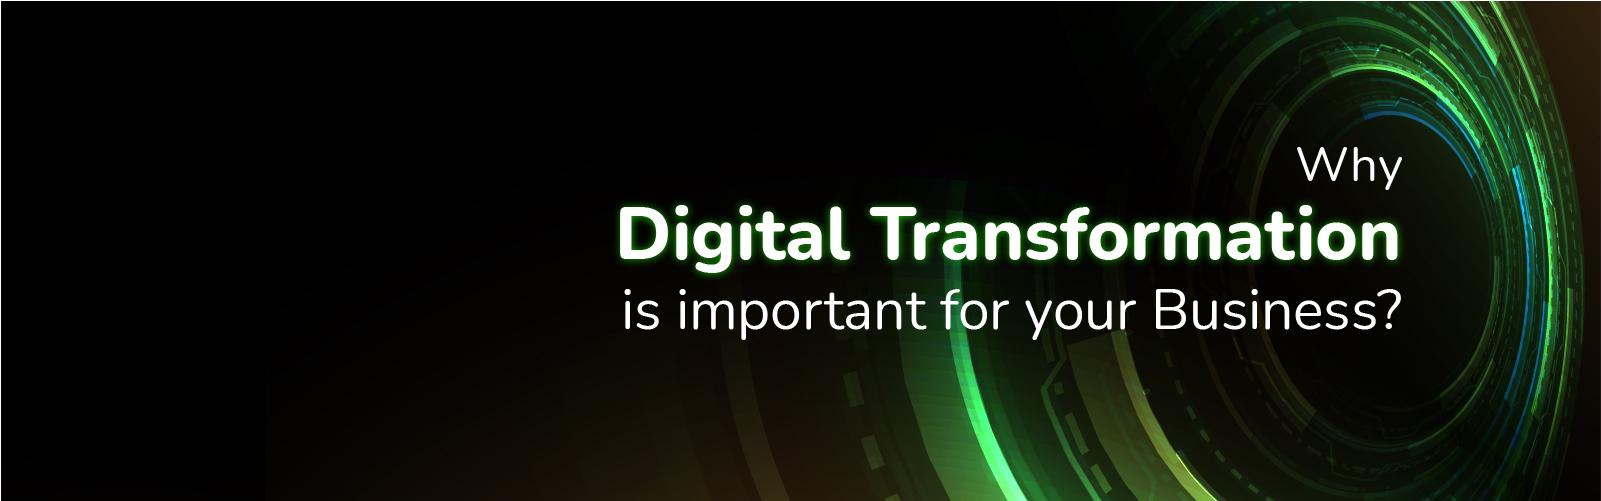 Why Digital Transformation is important for your Business?